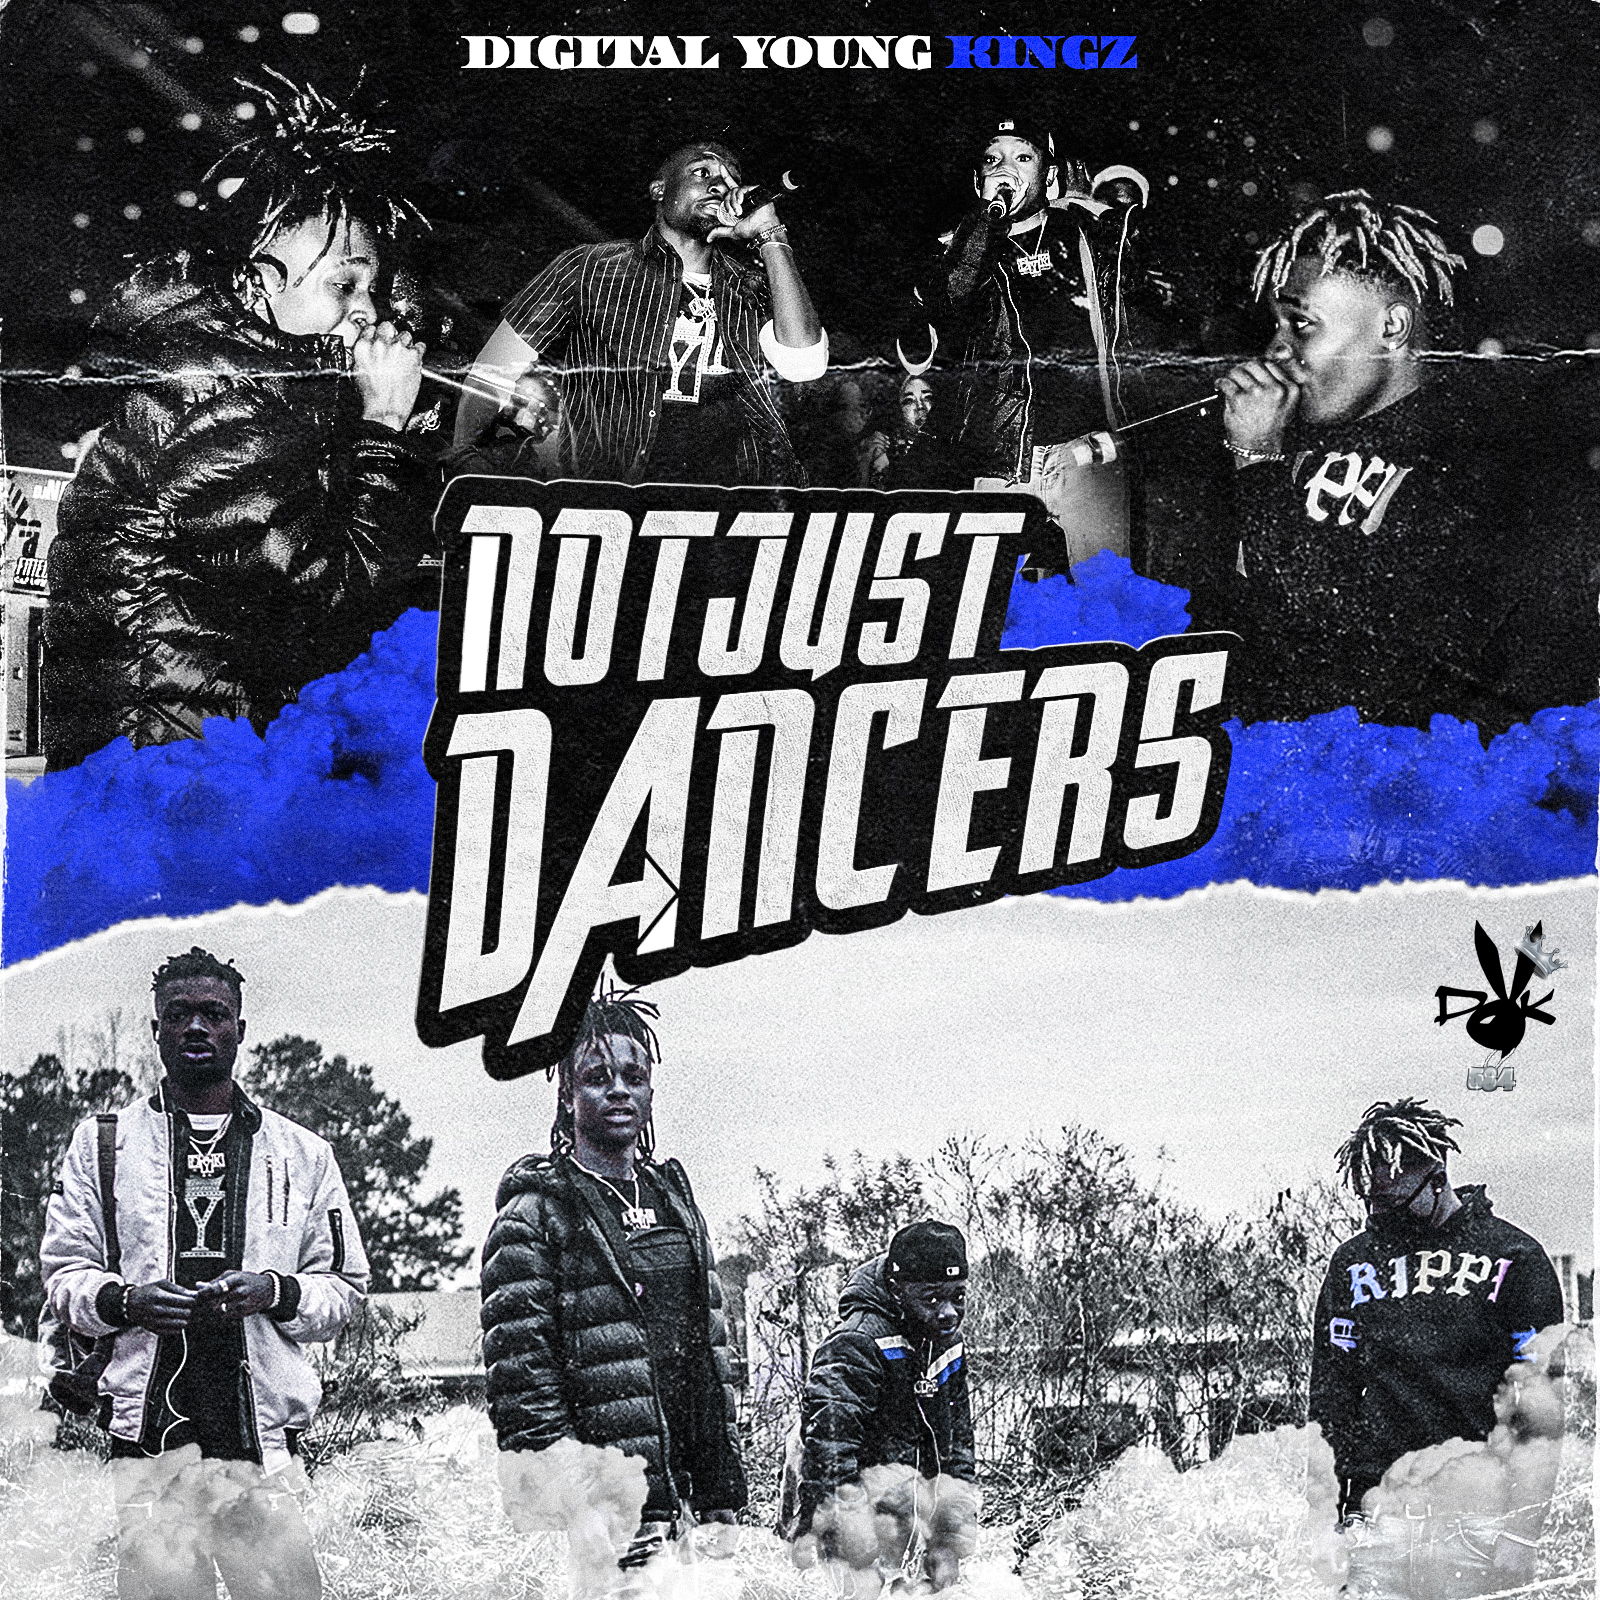 Dykingz - Not Just Dancers Cover Art